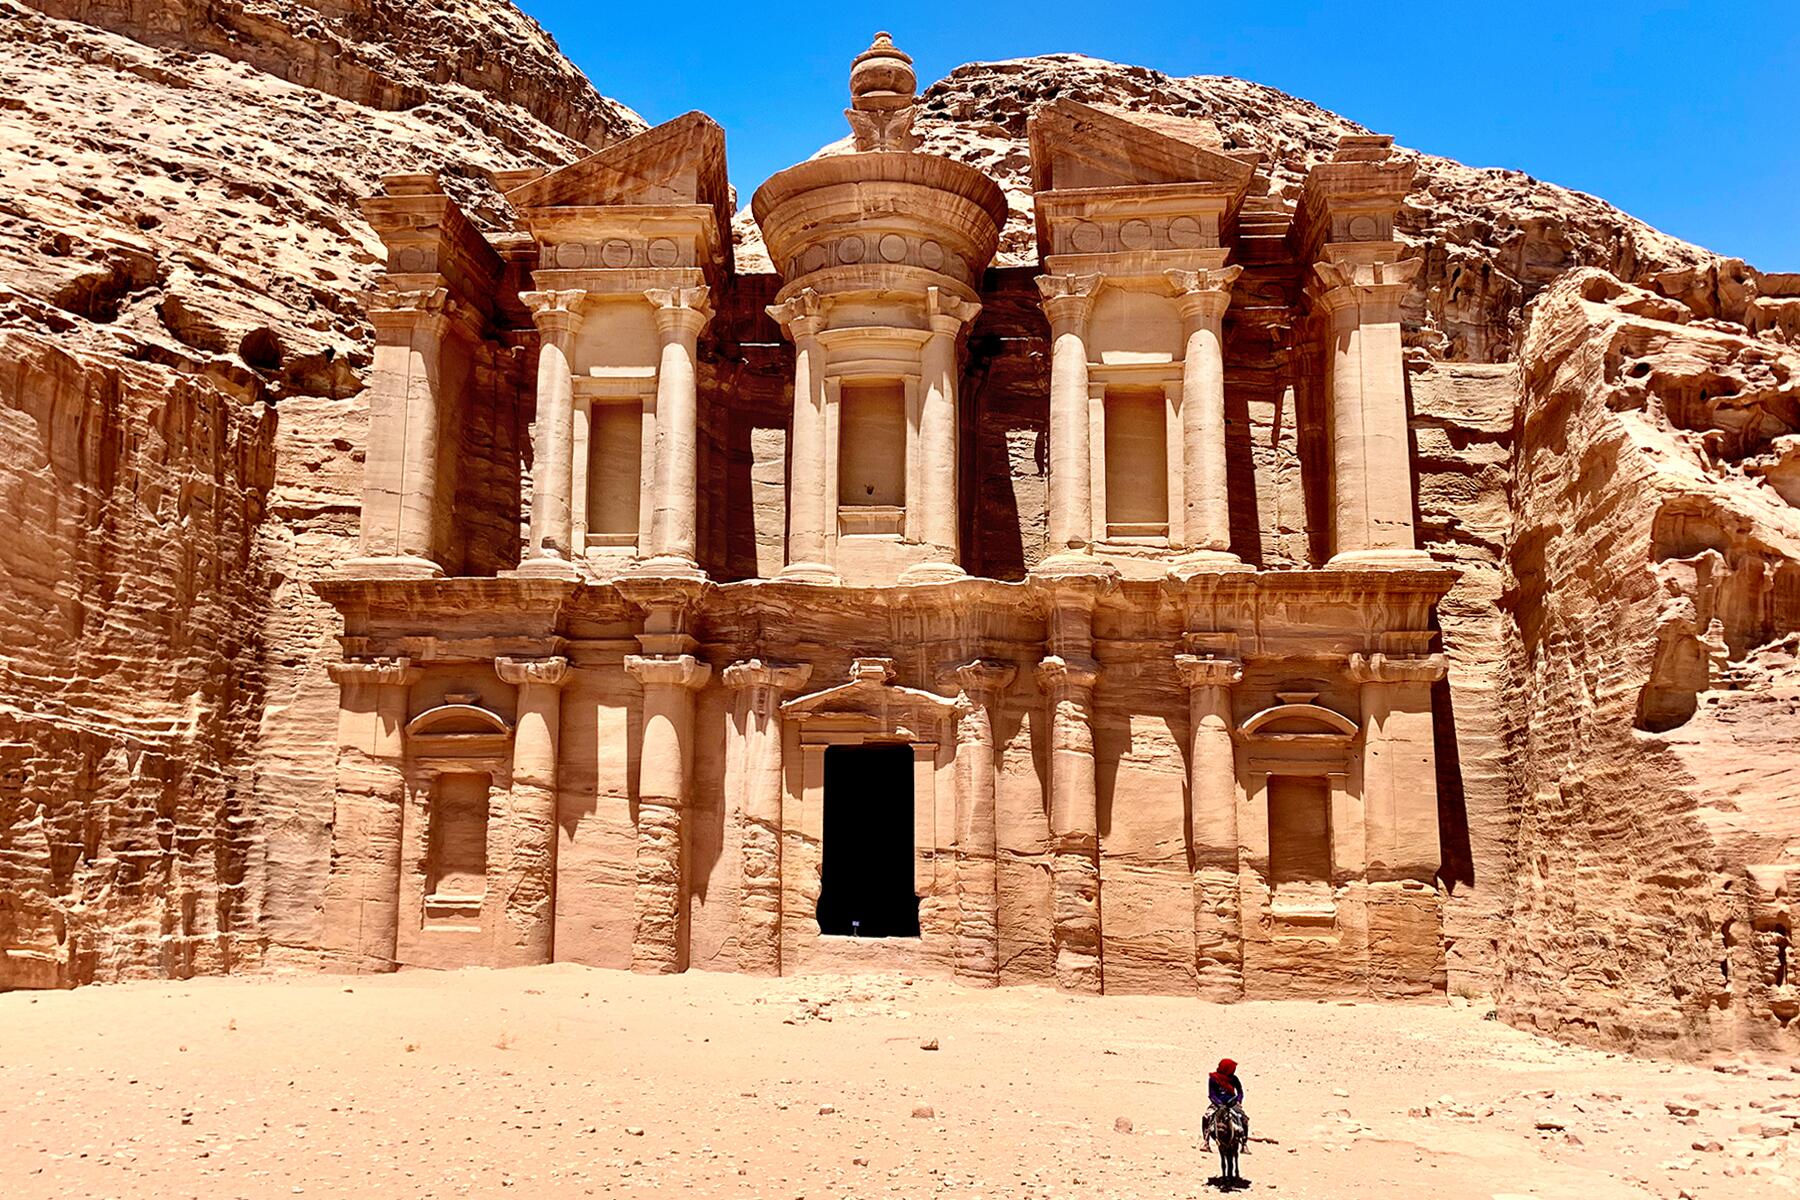 How I Made It to Petra, Despite an Incredibly Long Journey